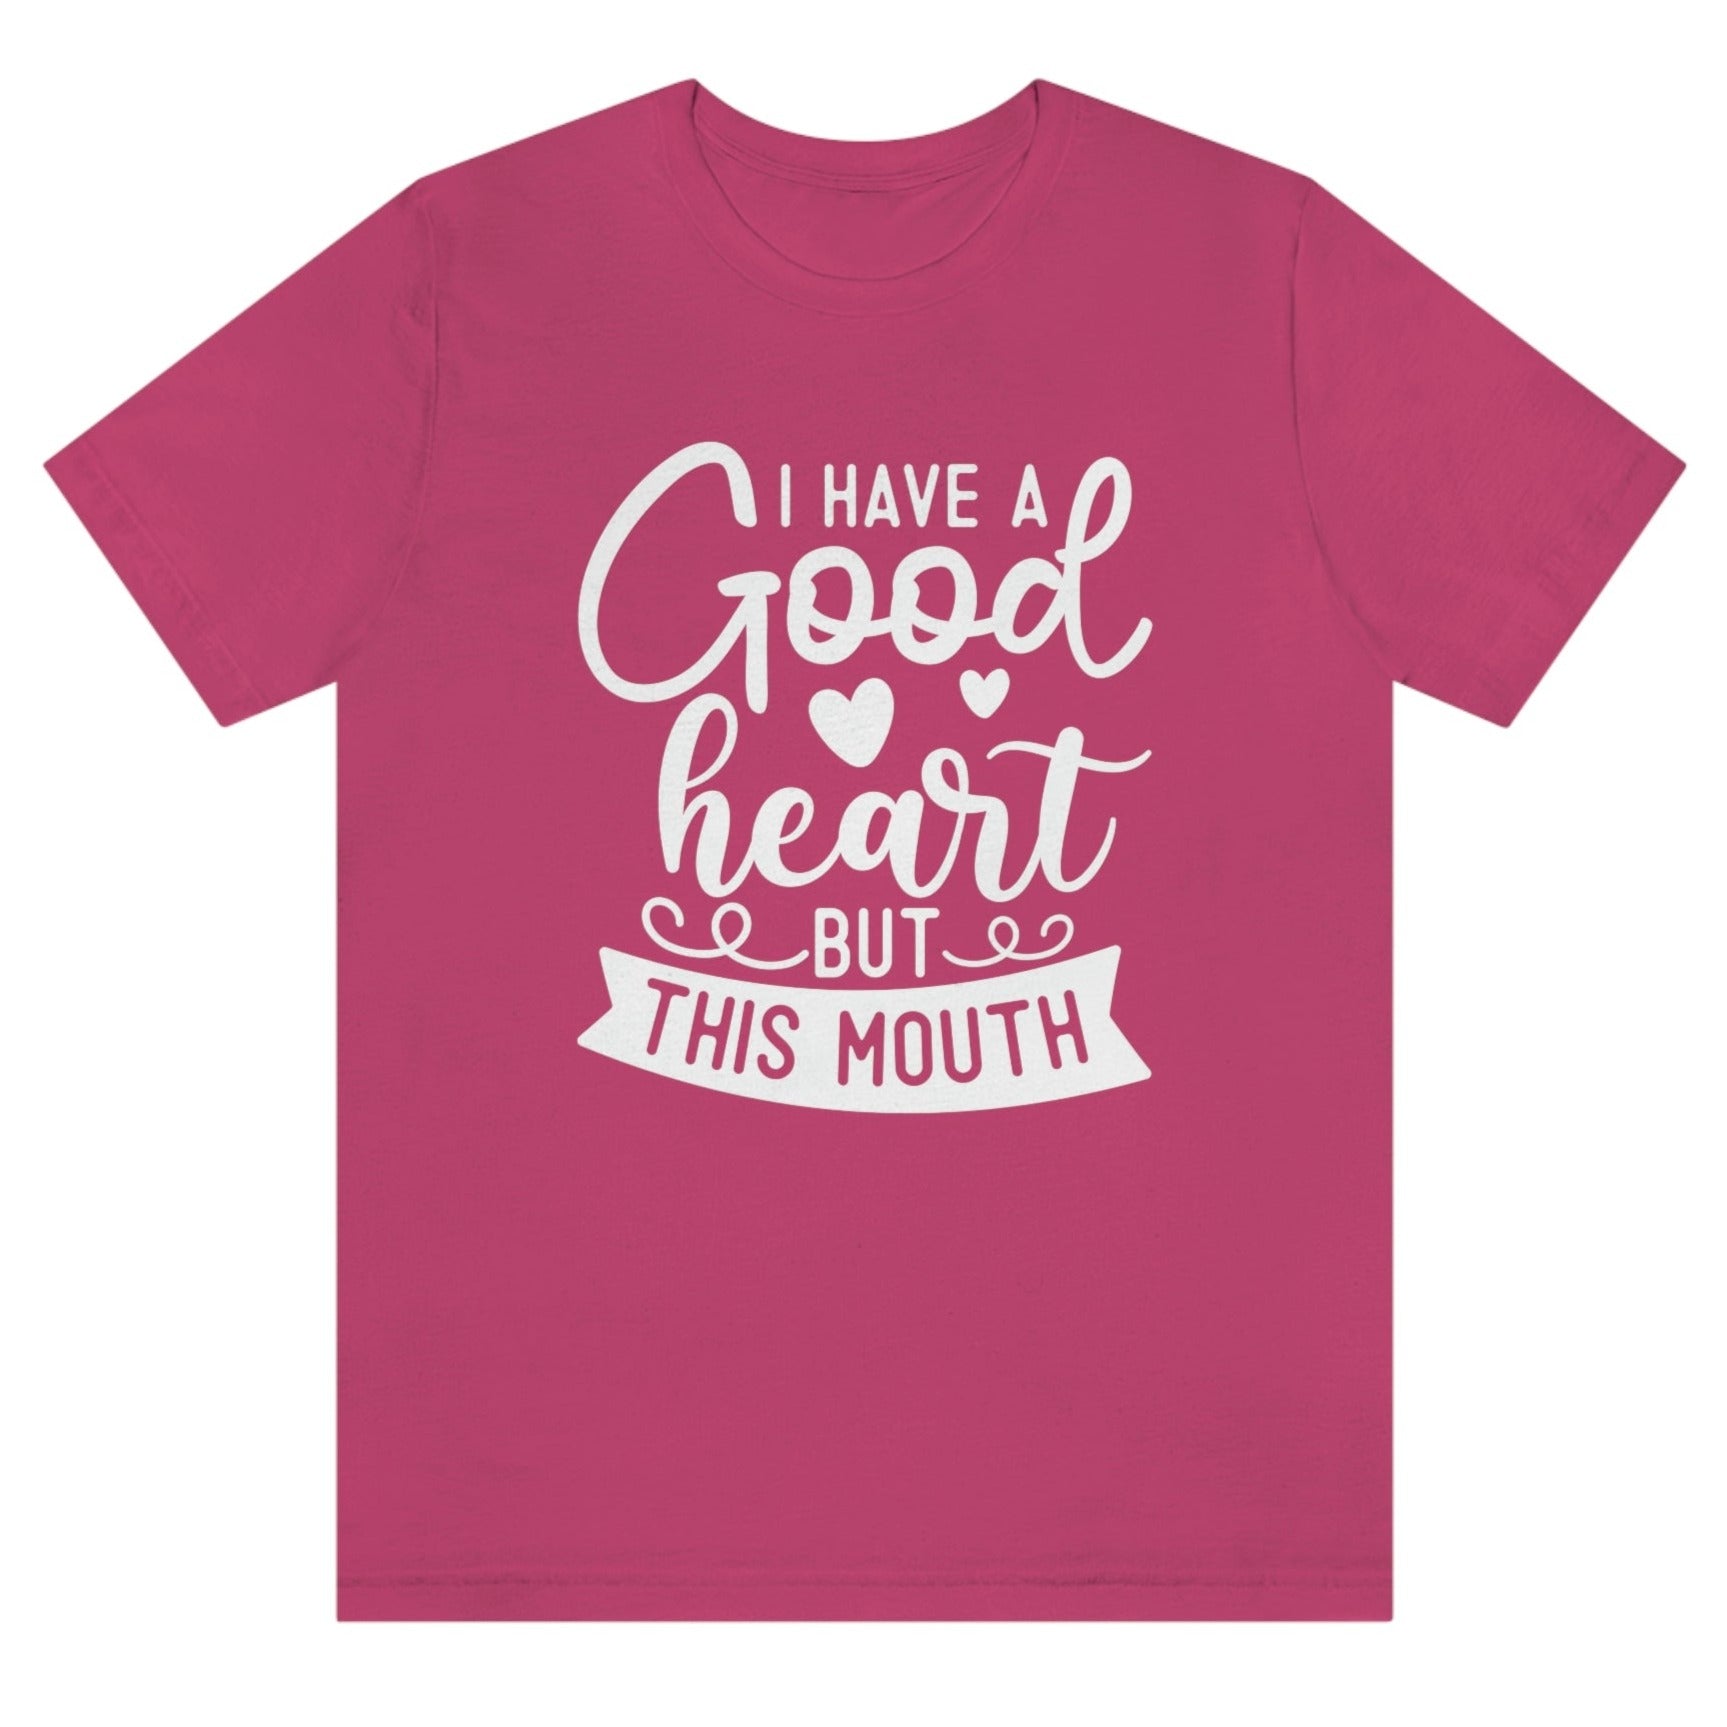 i-have-a-good-heart-but-this-mouth-berry-t-shirt-women-sarcastic-funny